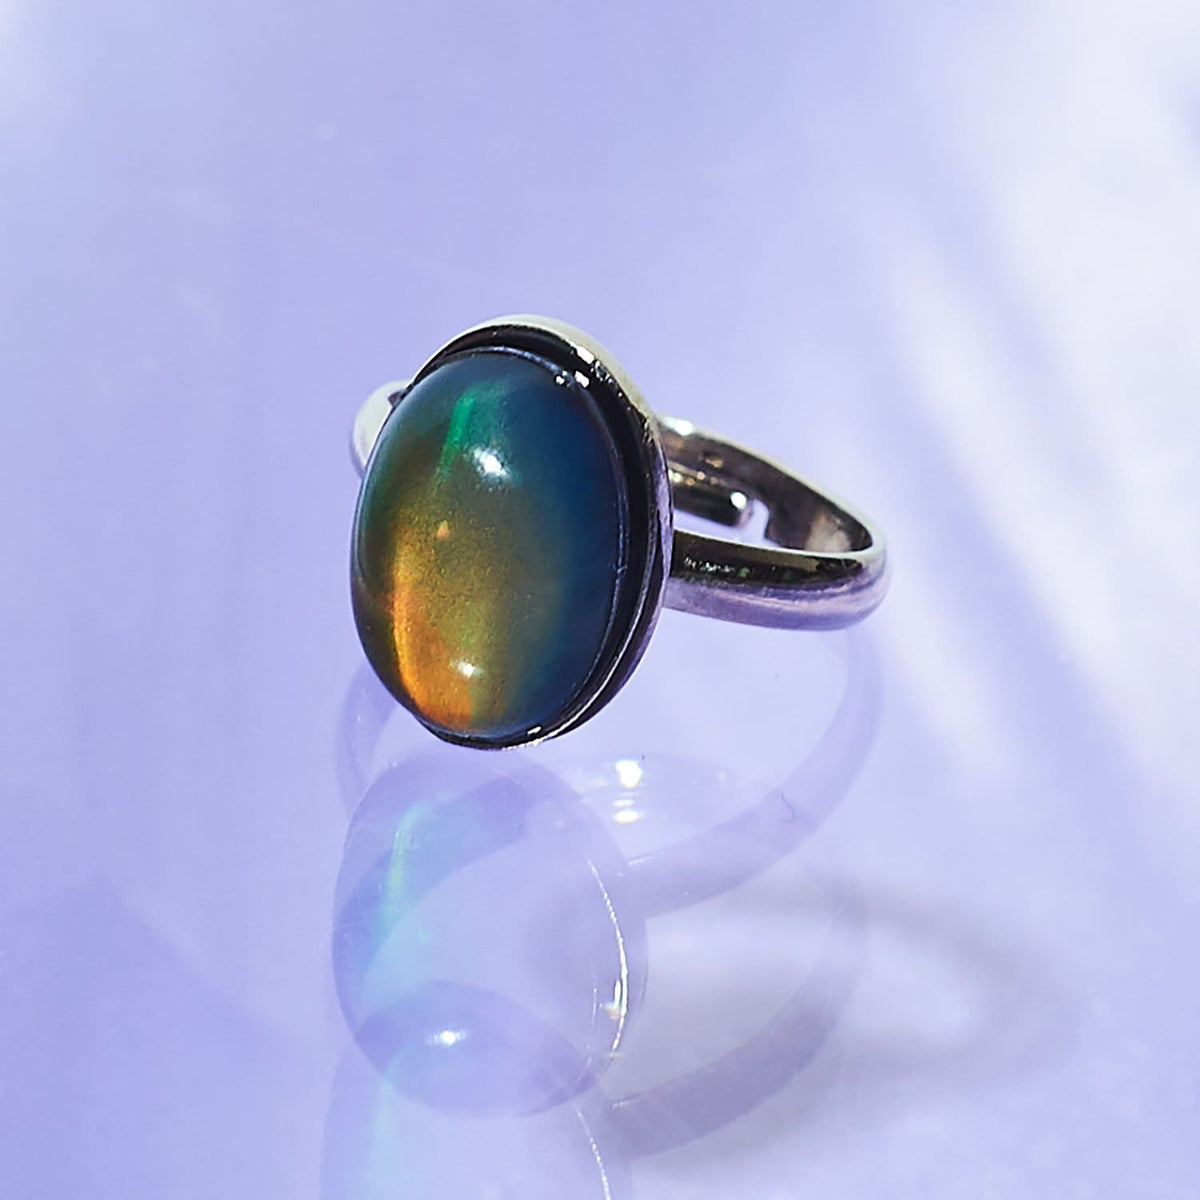 Oval Mood Ring 90s - Baby - back to School - Bff - Mood Ring